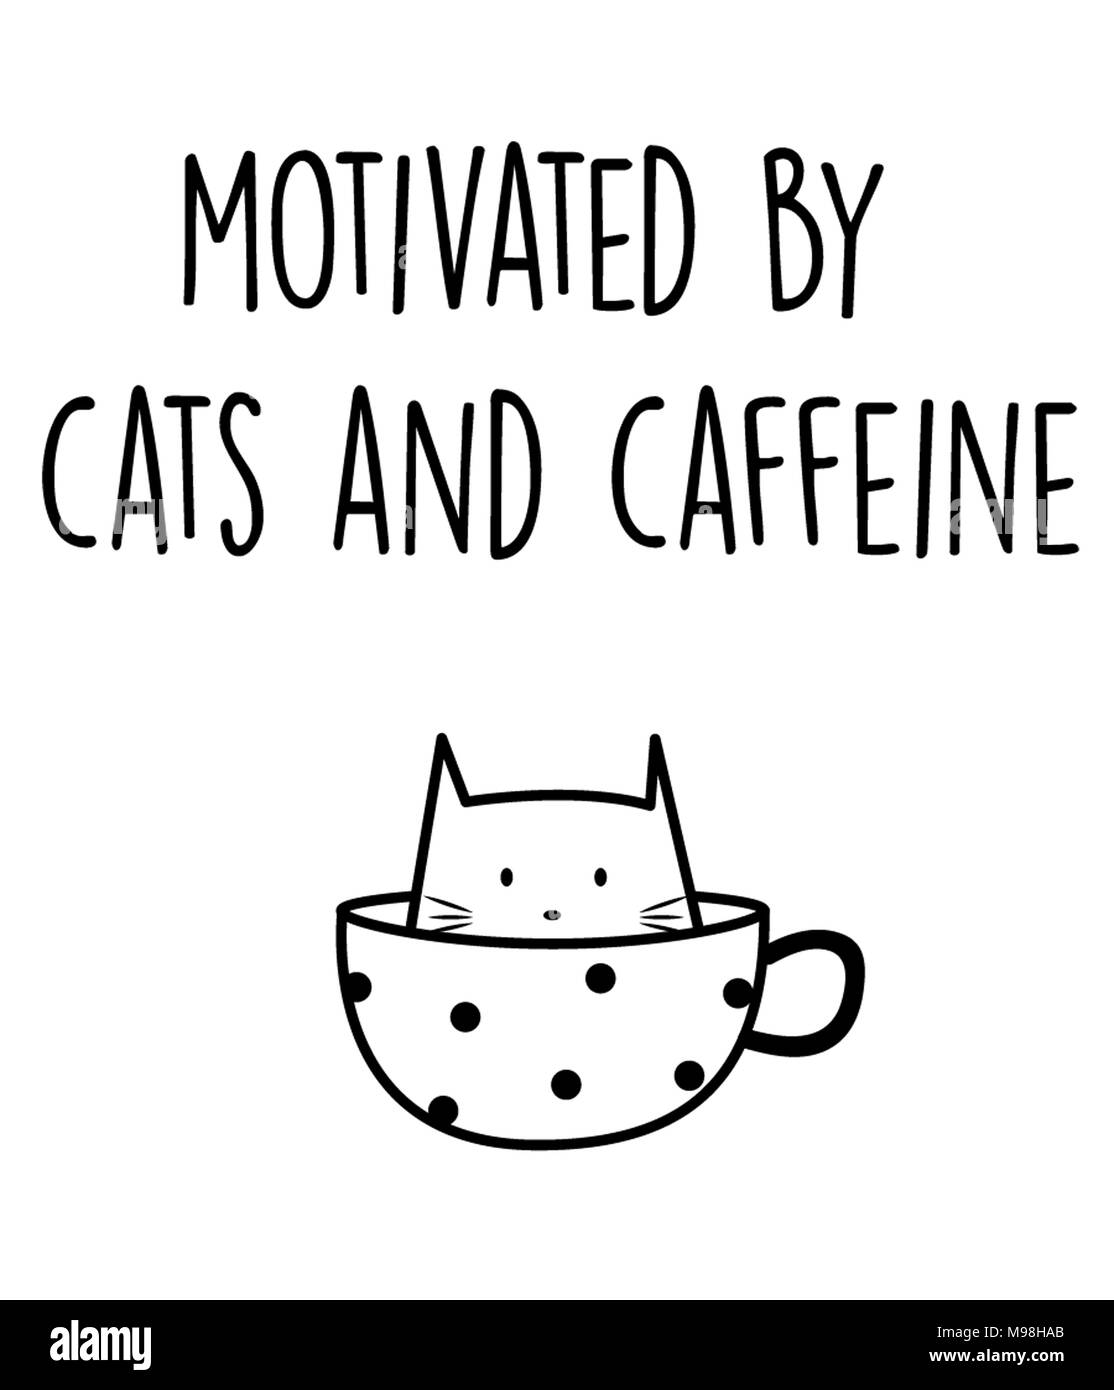 motivated by cats and caffeine Stock Photo